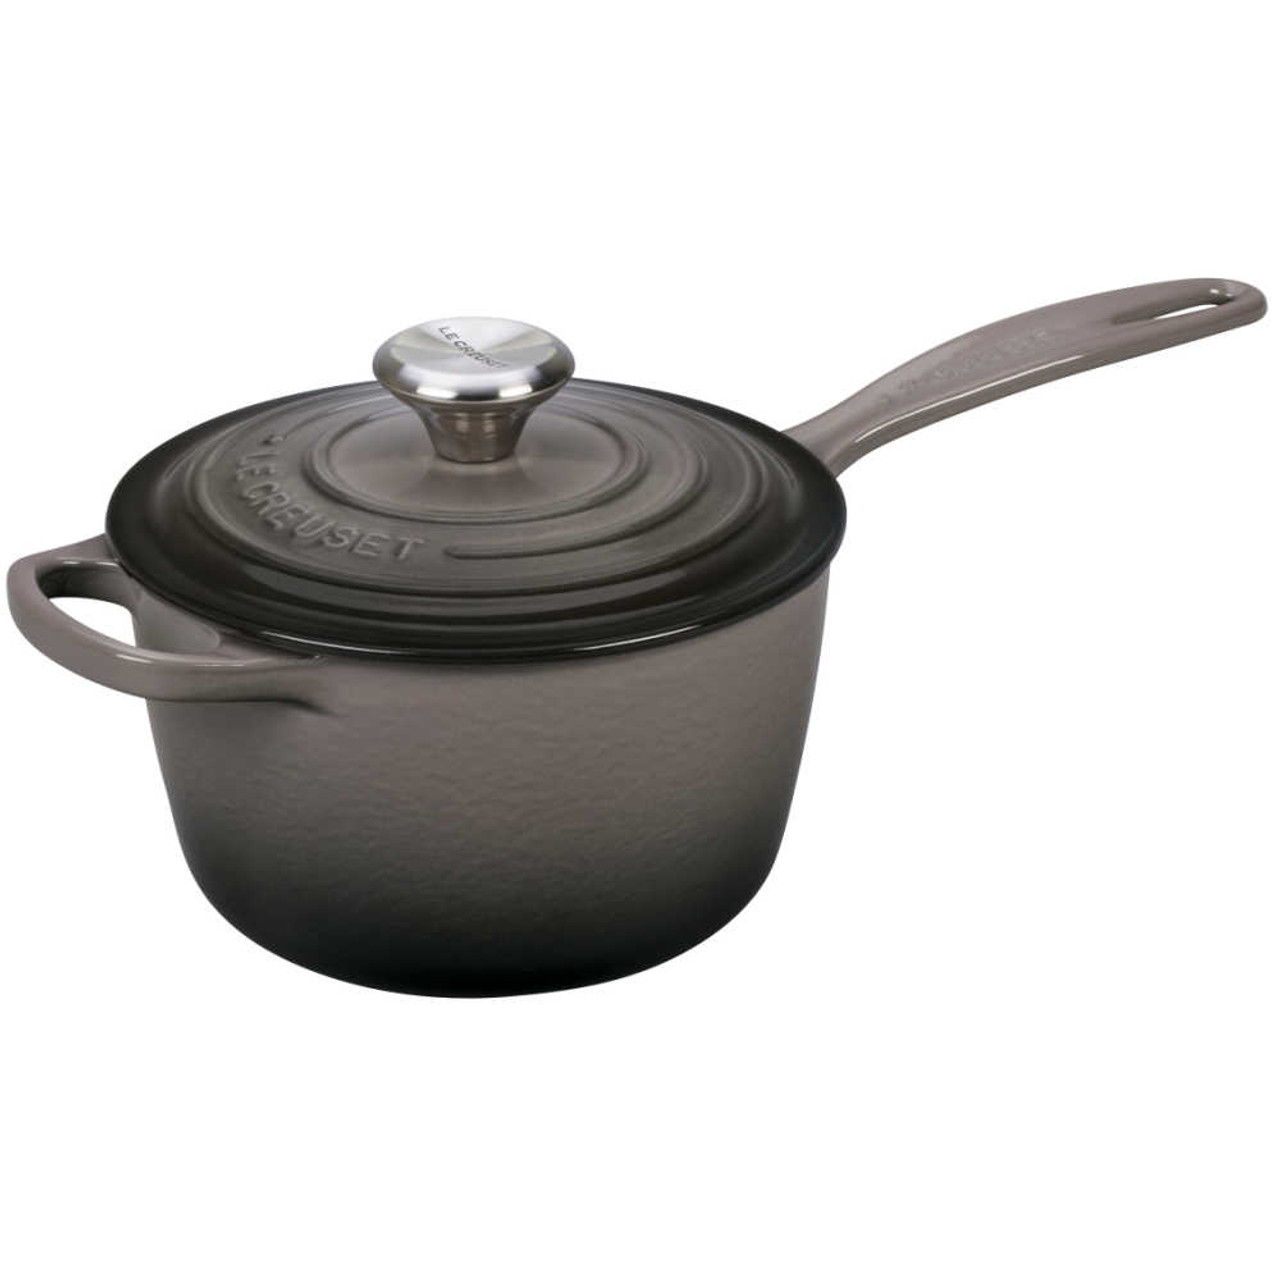 https://cdn11.bigcommerce.com/s-hccytny0od/images/stencil/1280x1280/products/1953/17547/Le_Creuset_Signature_Saucepan_Oyster__95760.1639692796.jpg?c=2?imbypass=on